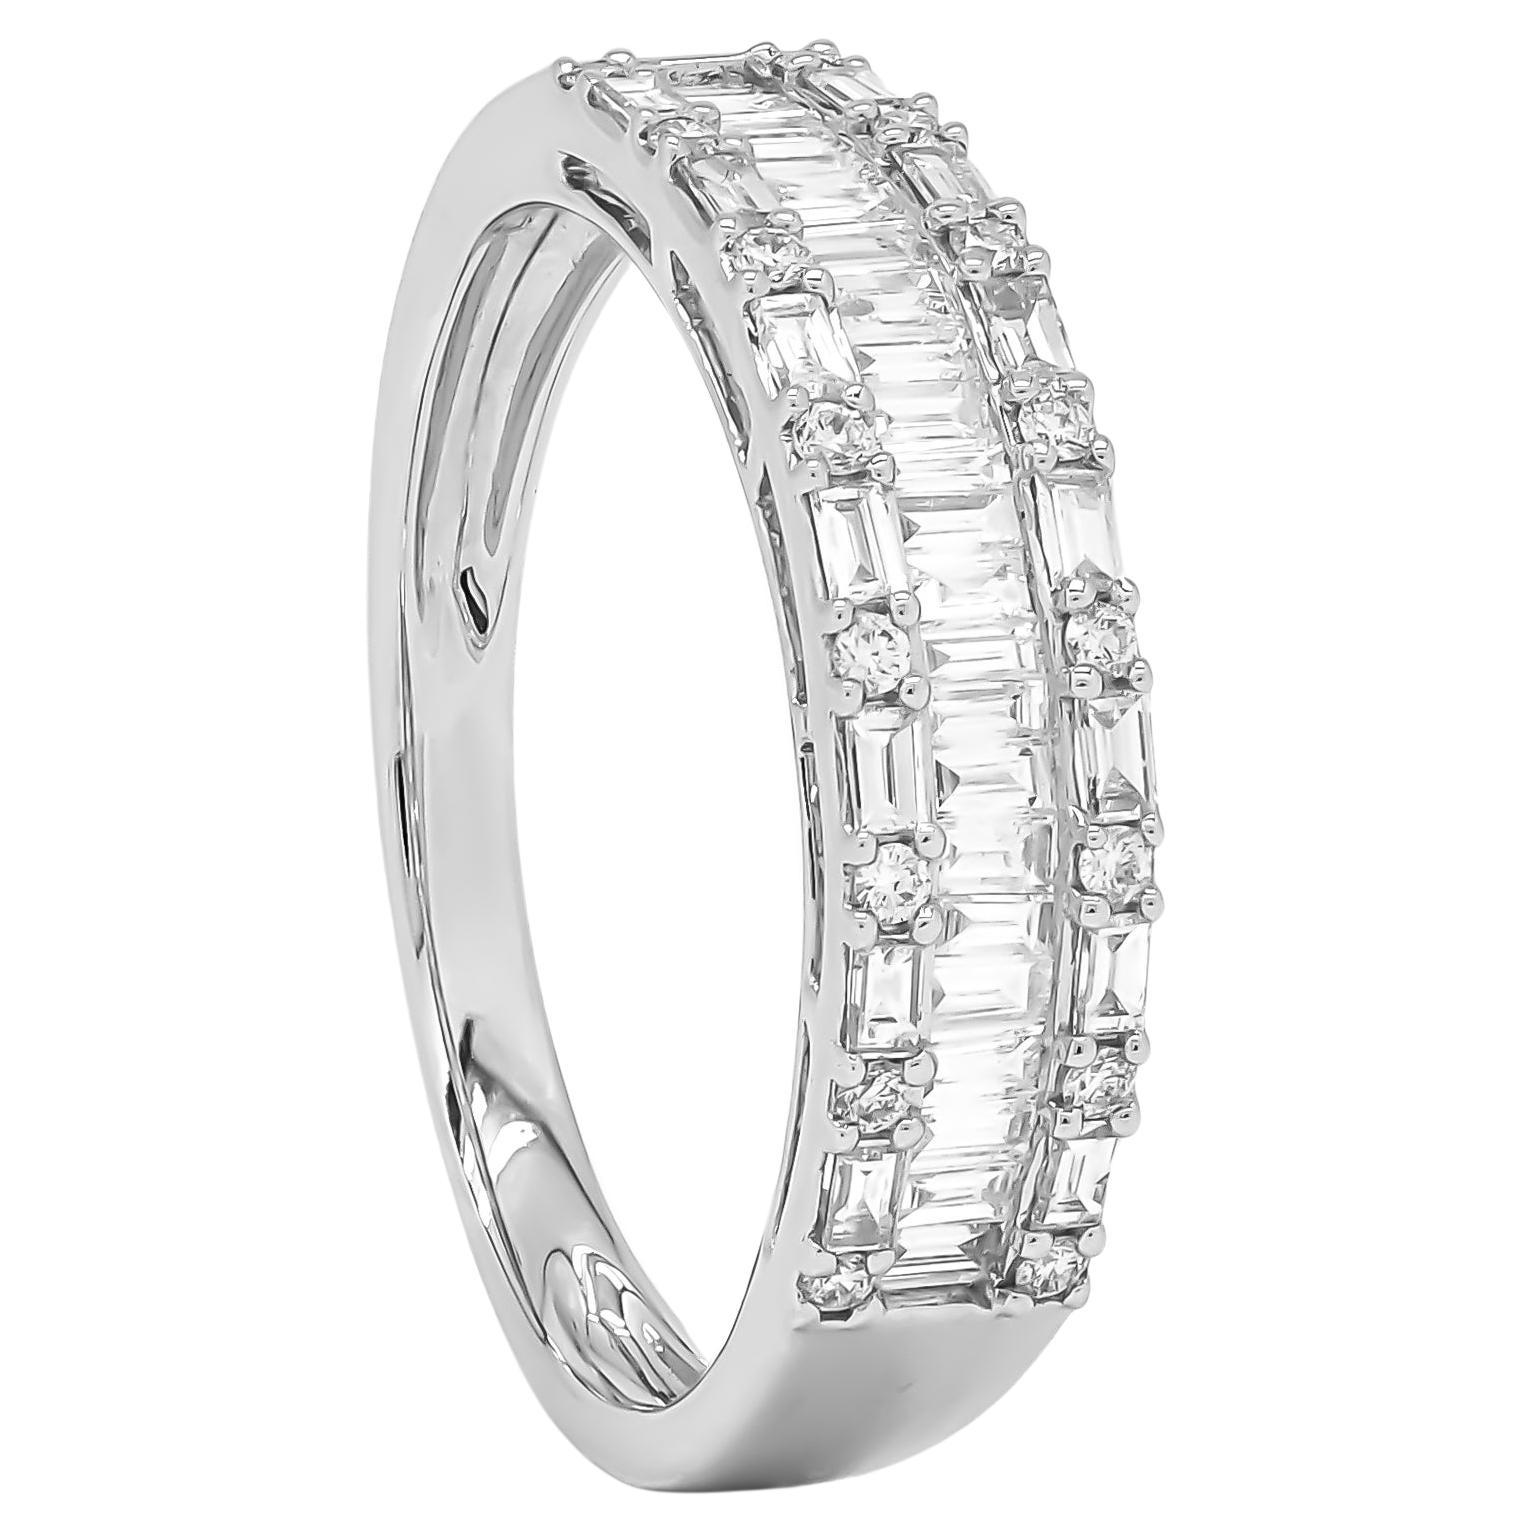 For Sale:  Exclusive Design 0.70 Carat Baguette Diamond Wedding Ring in White Gold